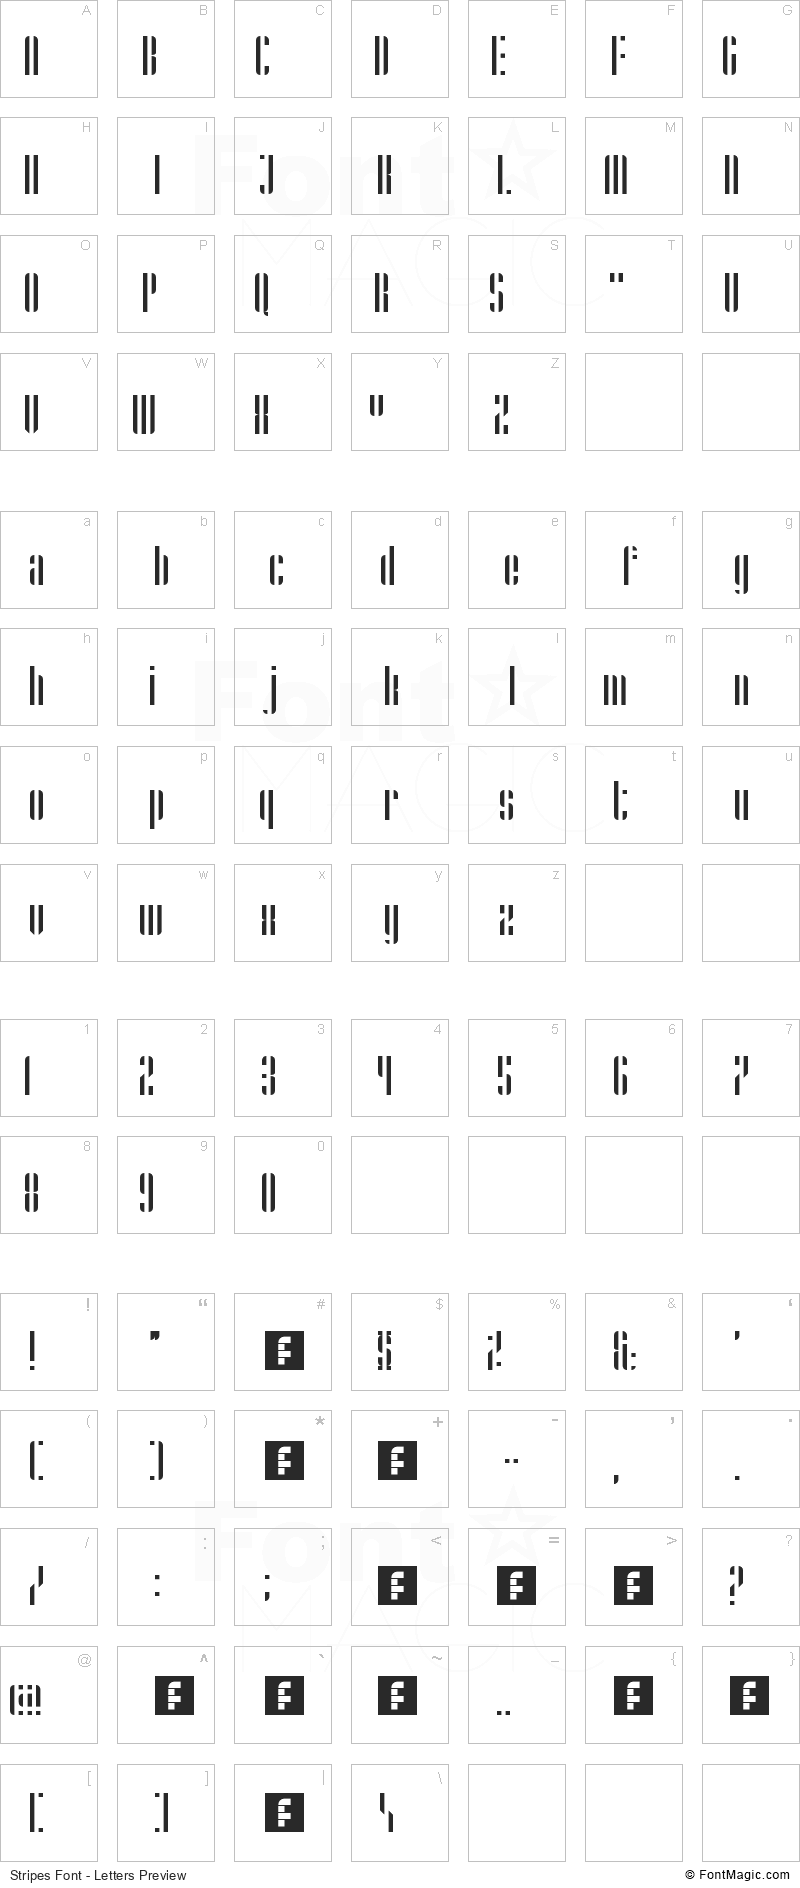 Stripes Font - All Latters Preview Chart